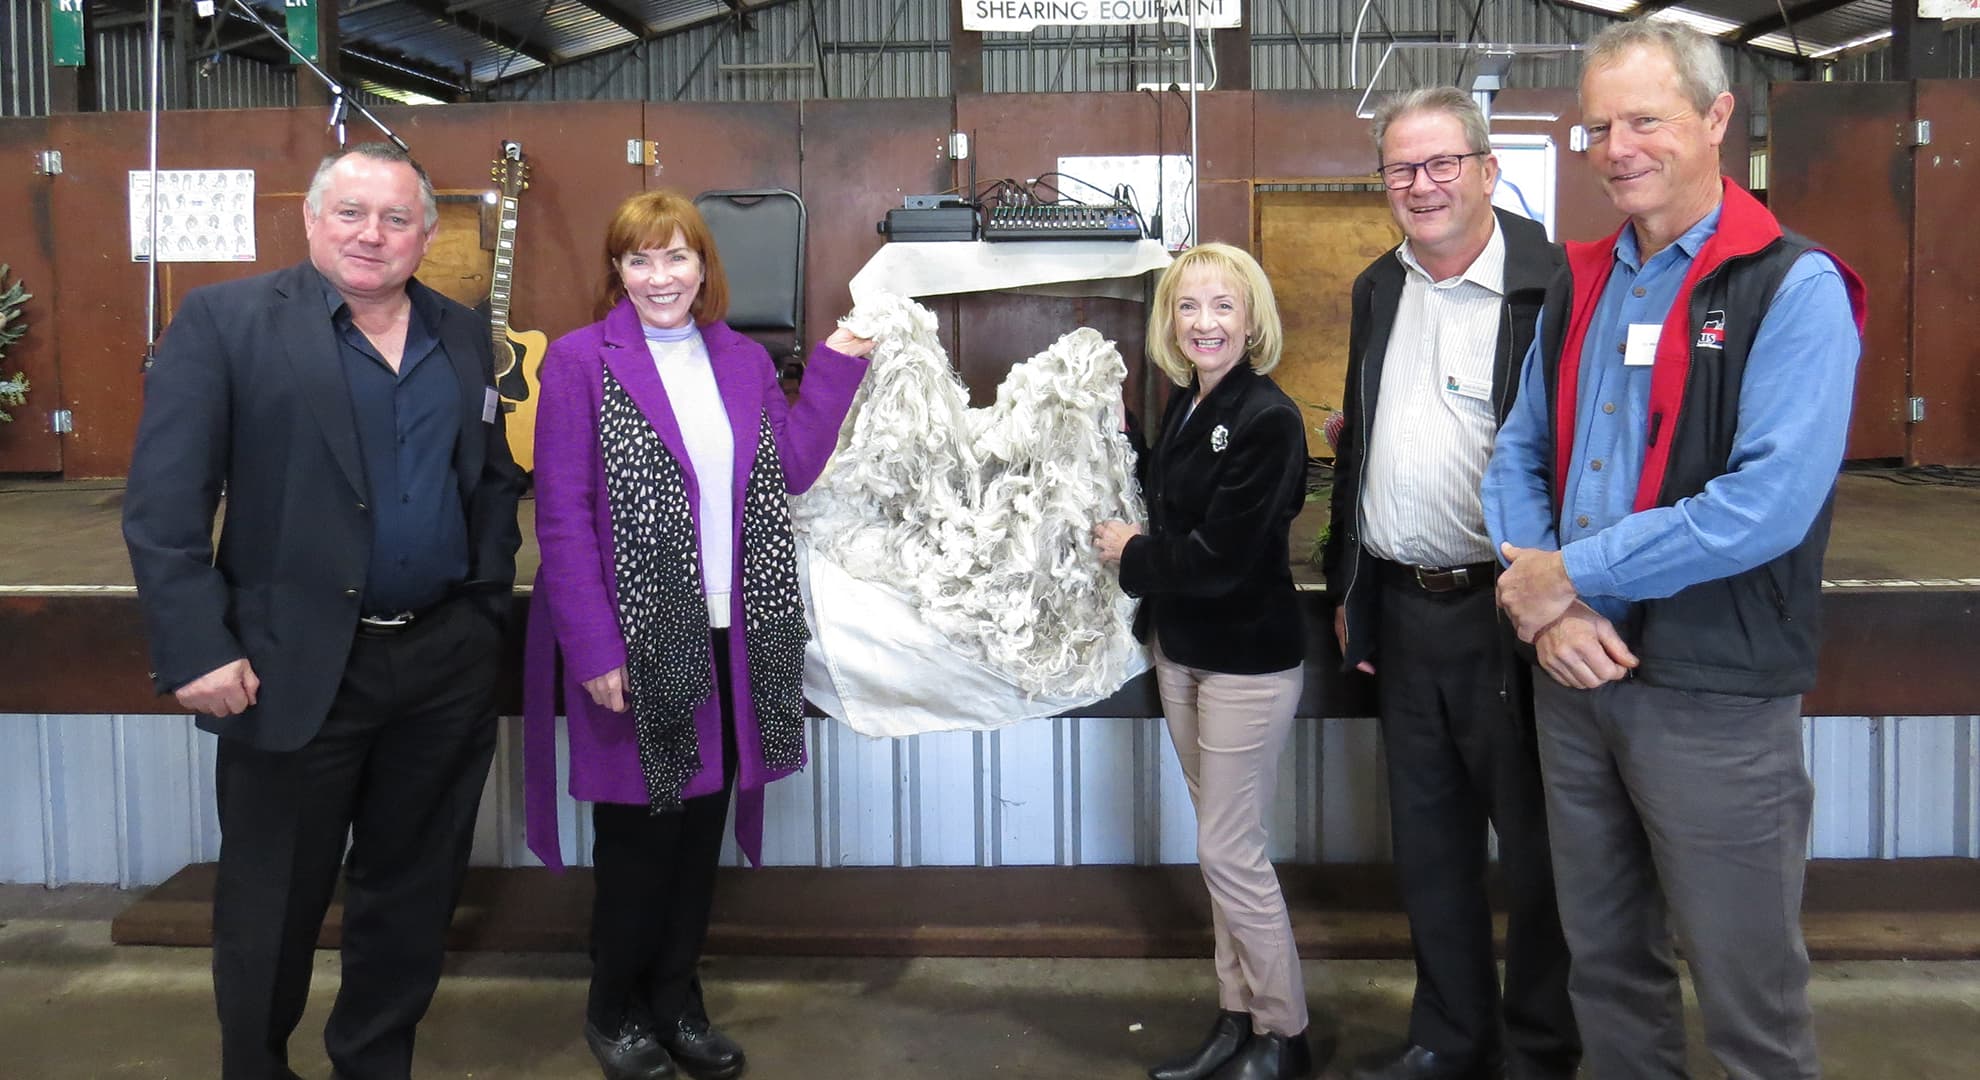 Five people standing in a shearing shed with two women holding the fleece in front of shearing equipment.